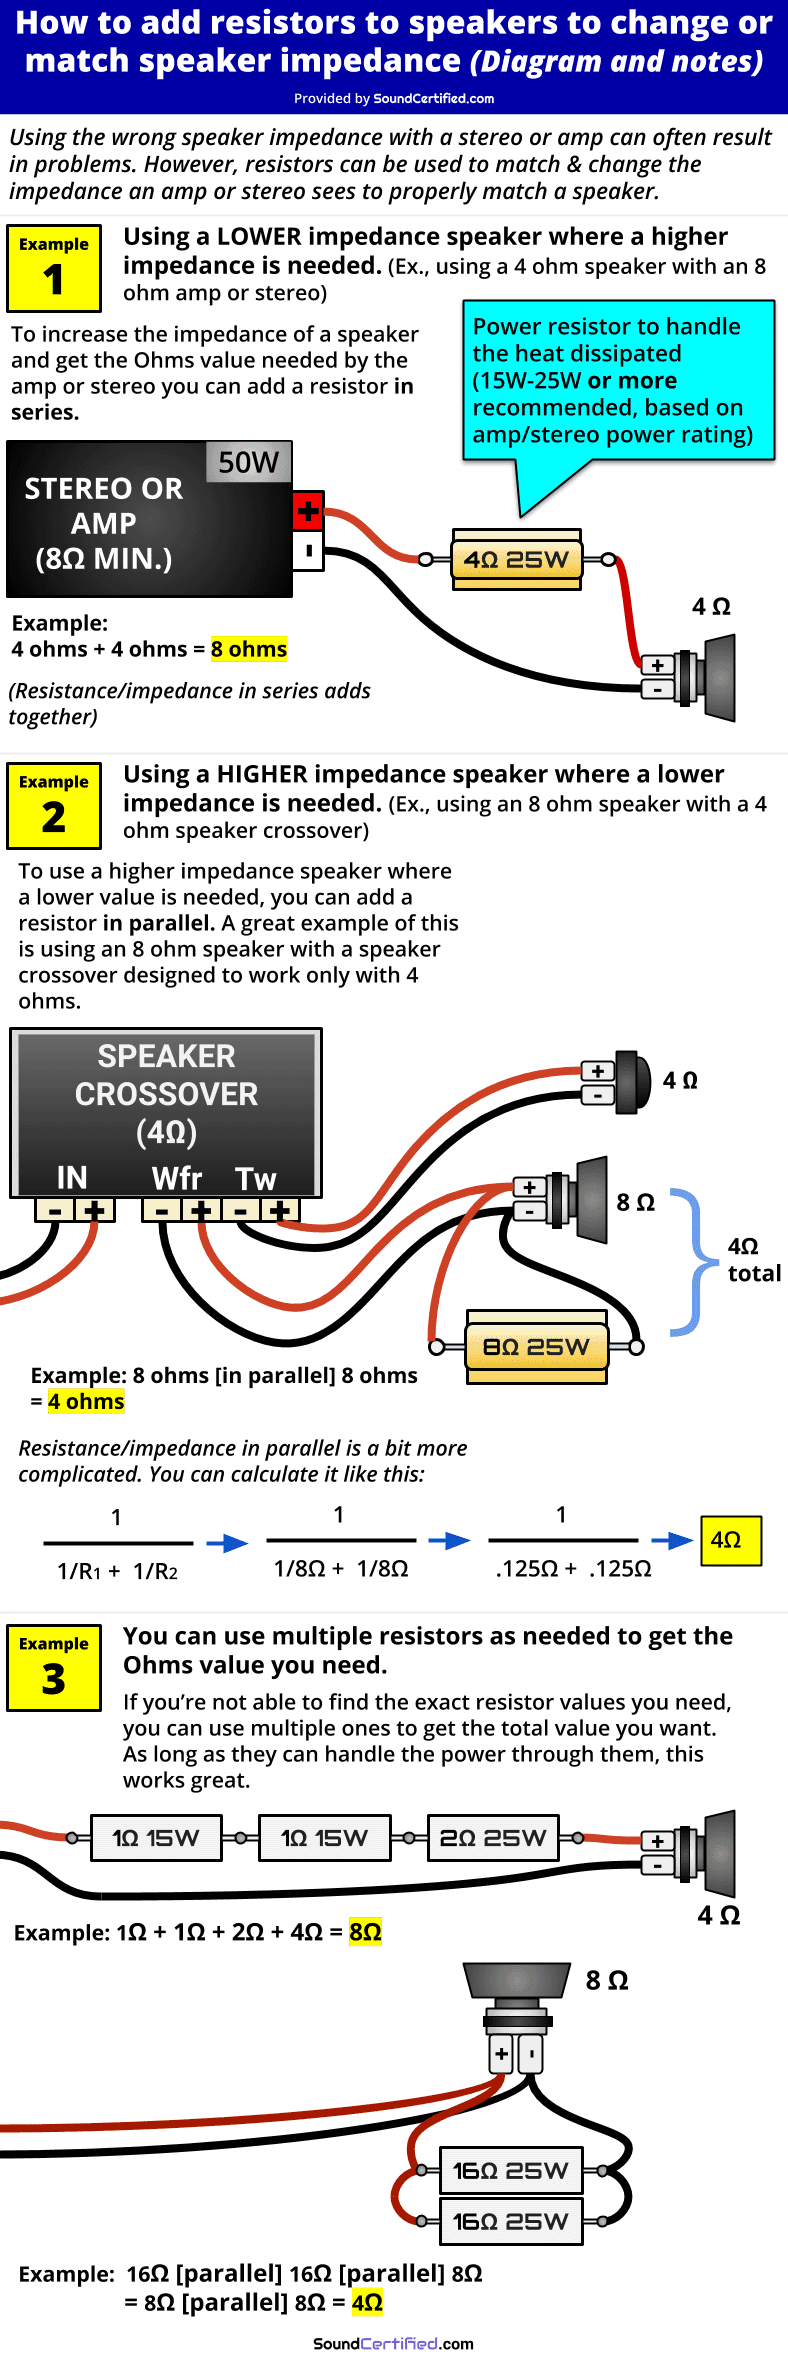 How to add resistor to speaker to change impedance diagram